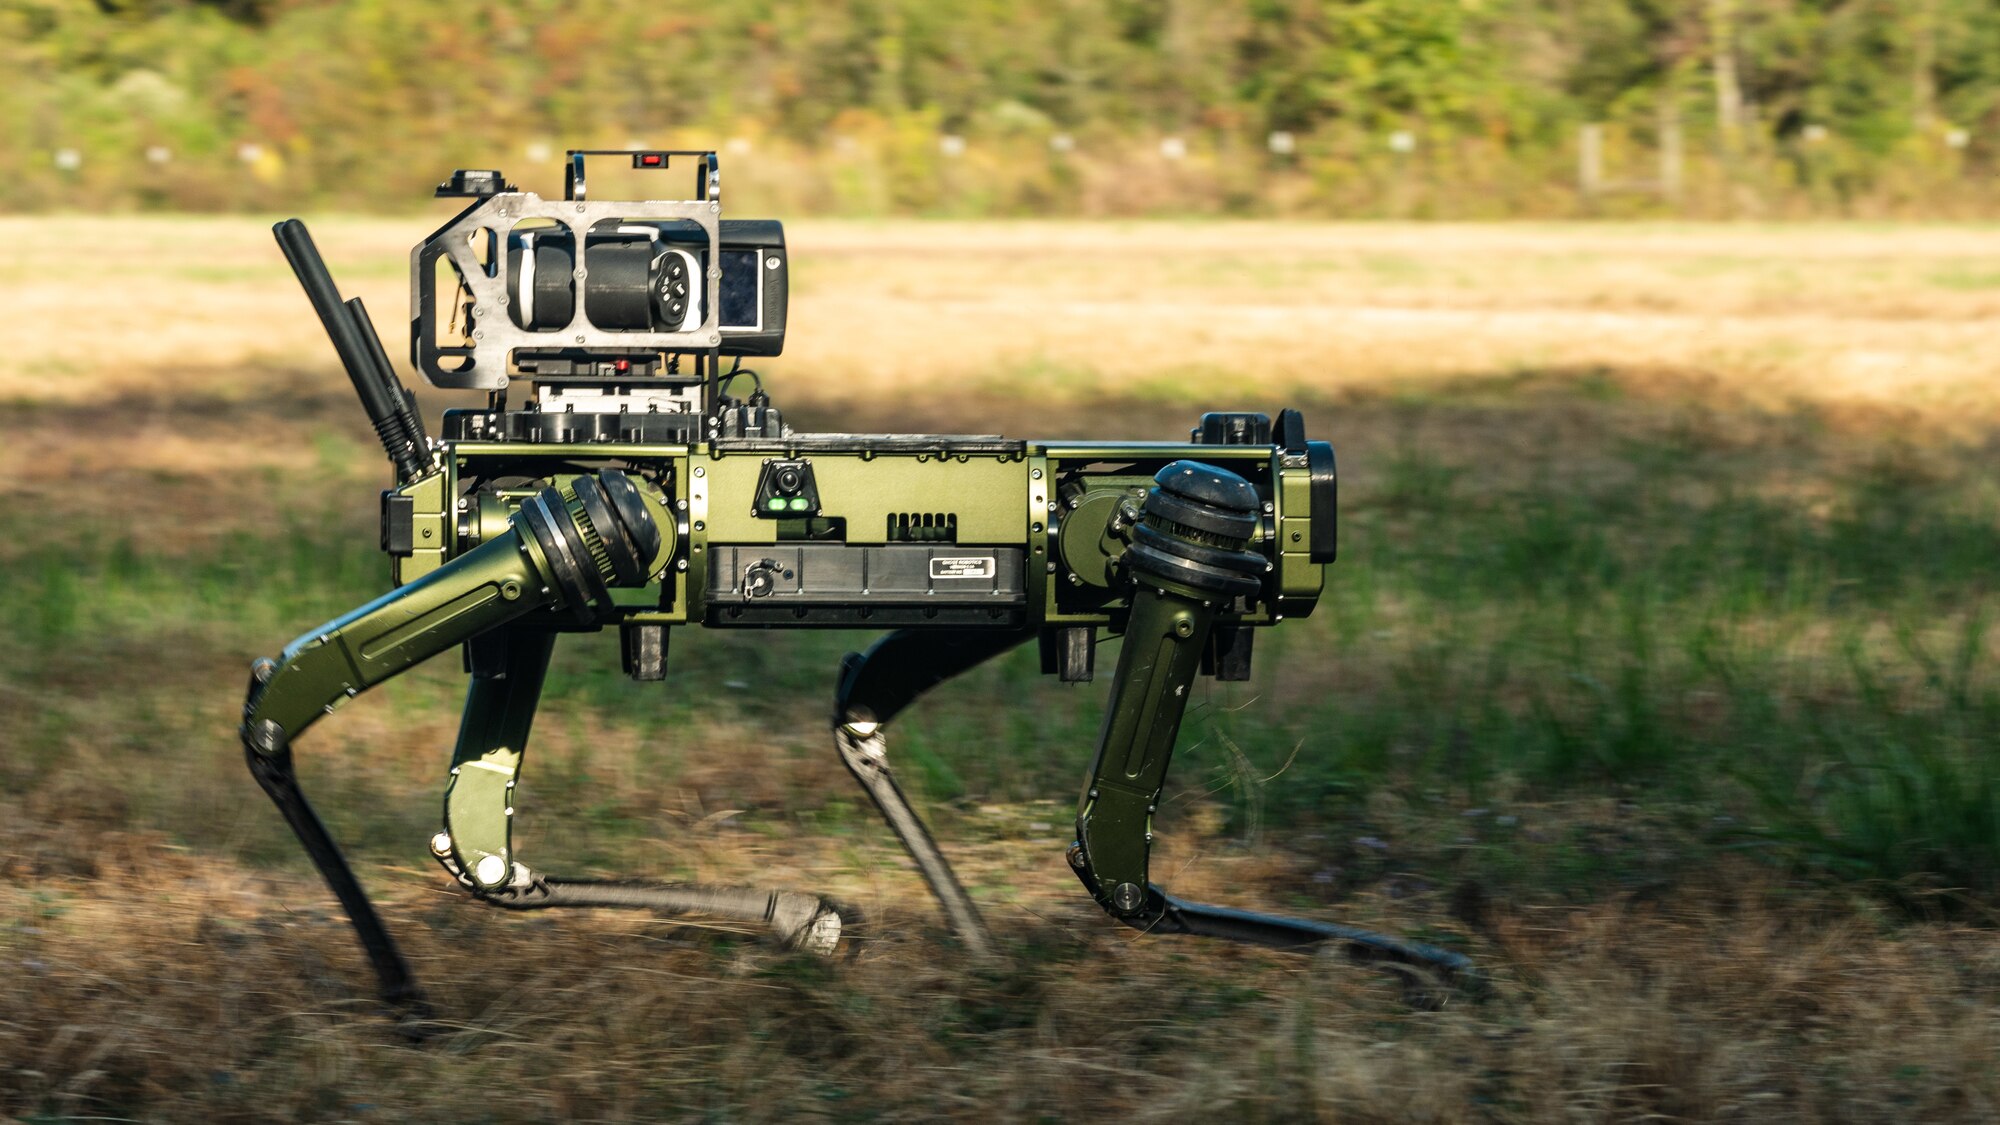 These machines, nicknamed "Robot Dogs", were created to augment manned chemical, biological, radiological, and nuclear response teams, minimizing the danger these Airmen face in hostile environments.